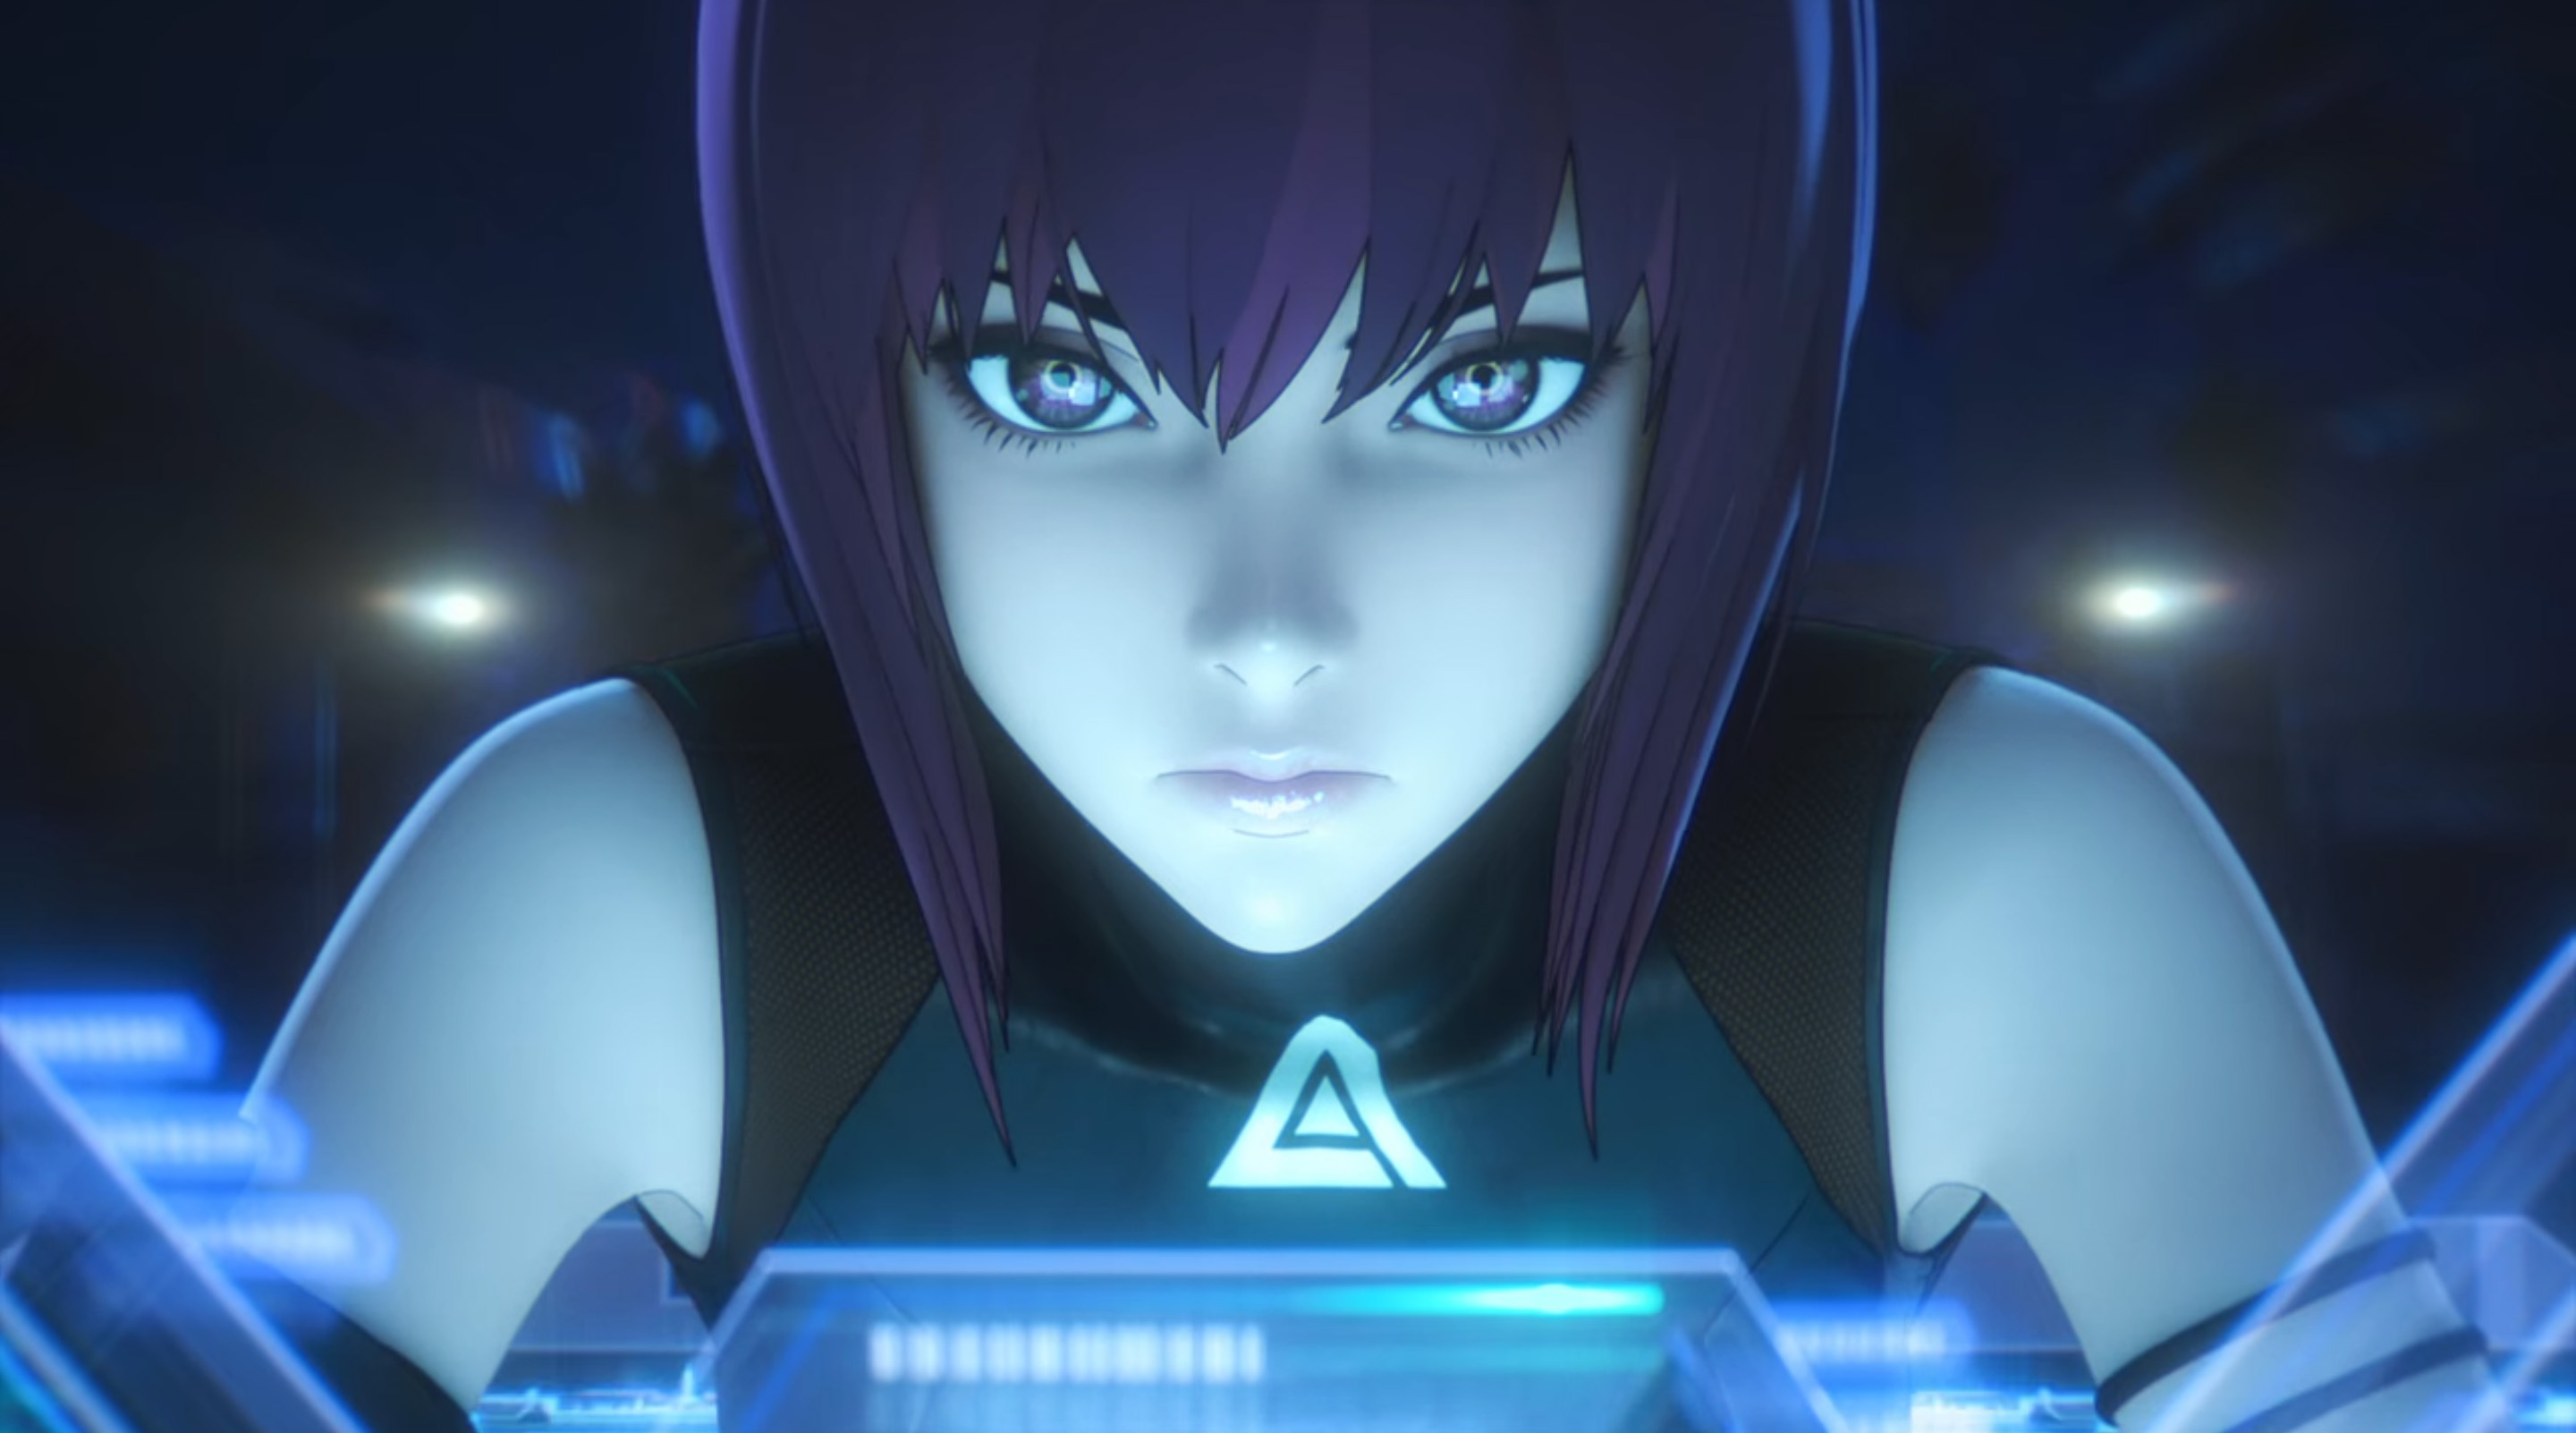 Ghost in the Shell SAC 2045